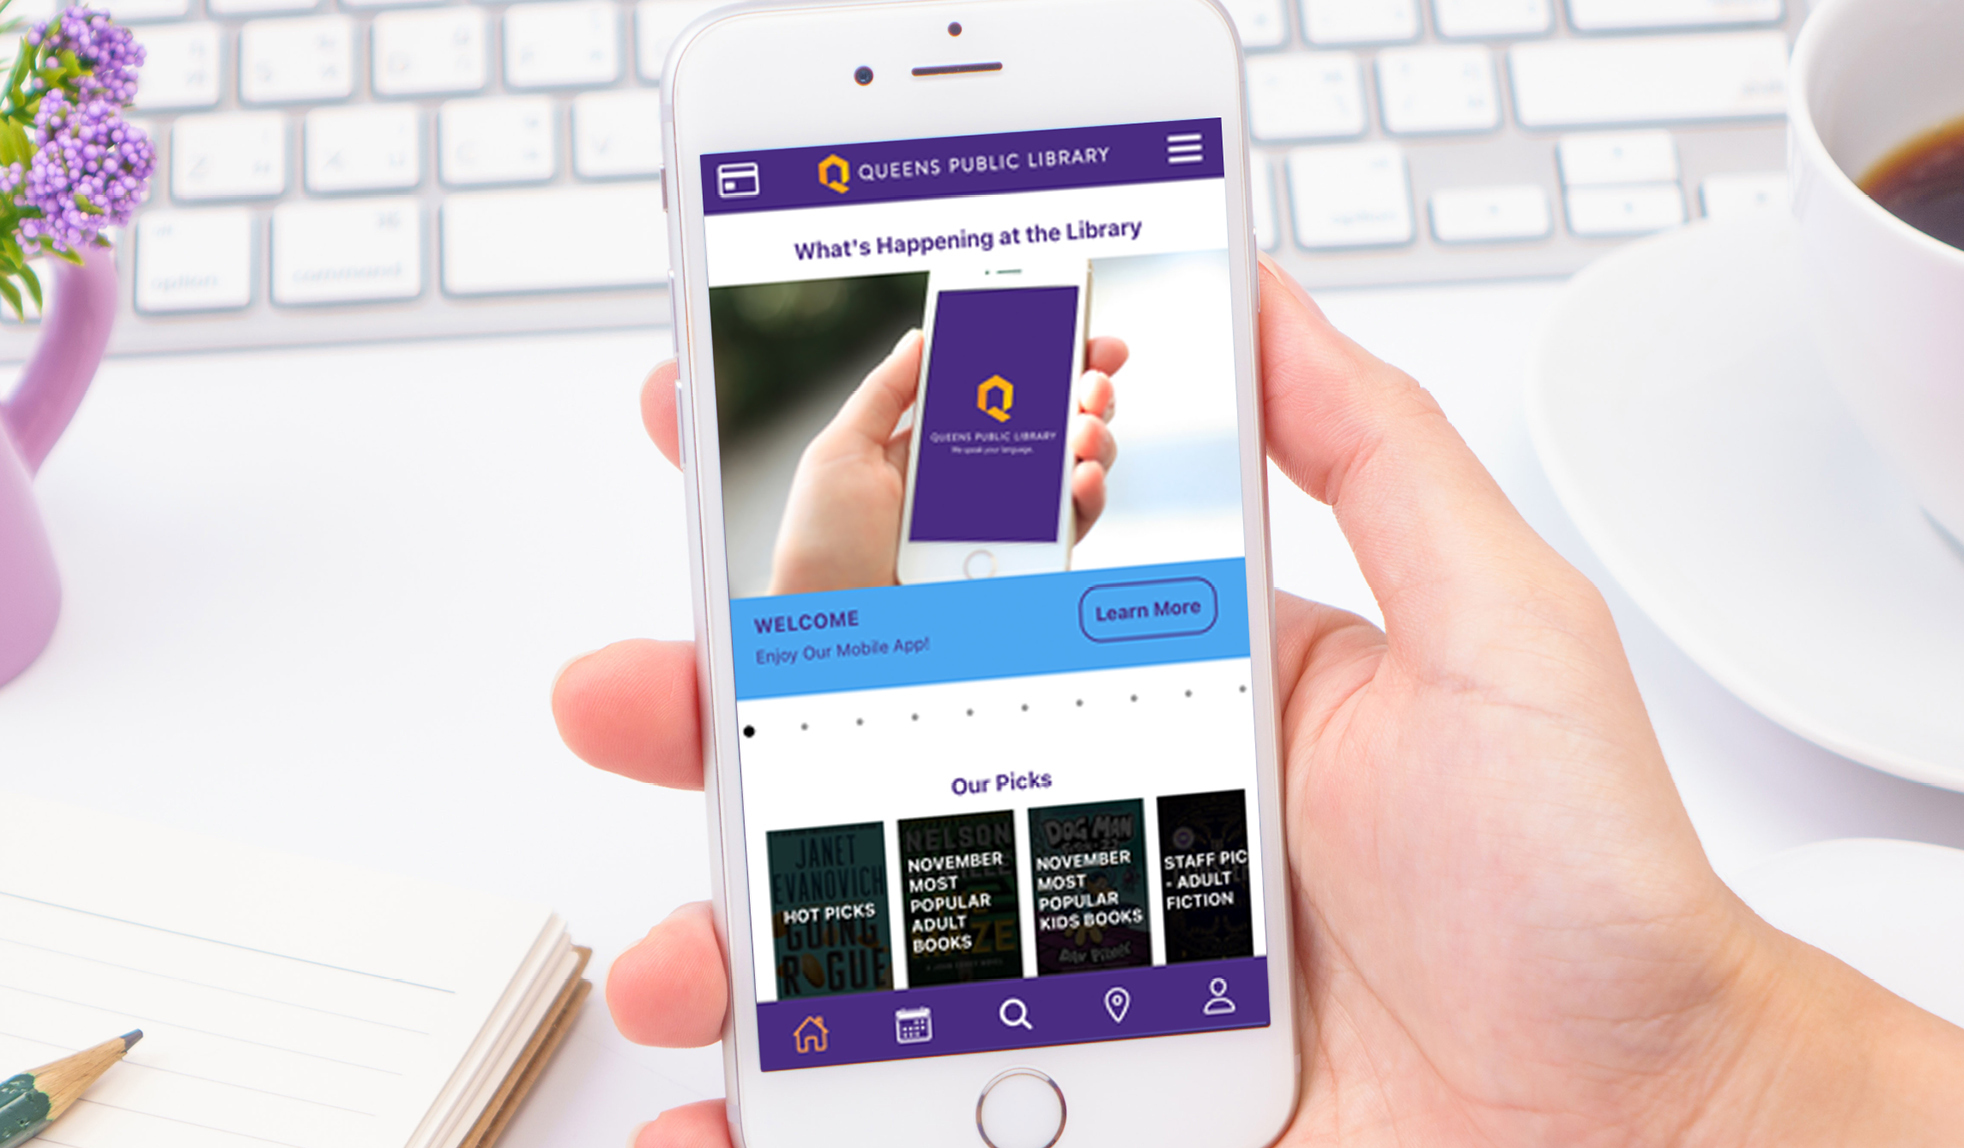 The QPL Mobile App now translates into 96 languages, including English!